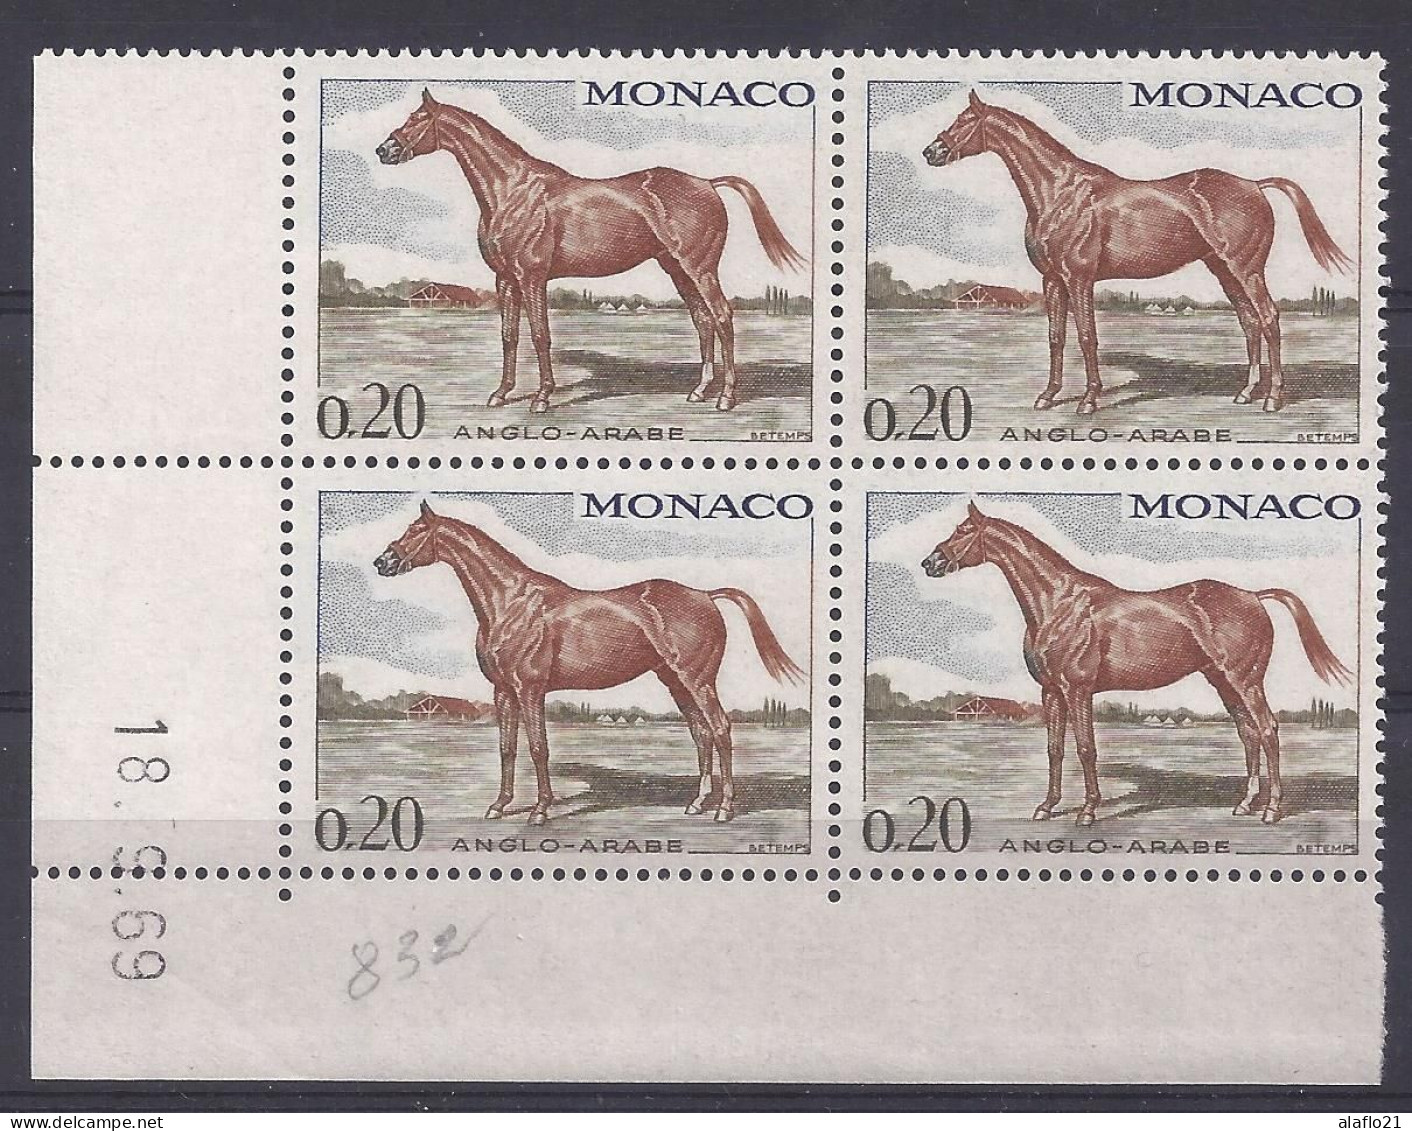 MONACO N° 832 - CHEVAL ANGLO-ARABE - BLOC De 4 COIN DATE - NEUF SANS CHARNIERE - 18/9/69 - Unused Stamps